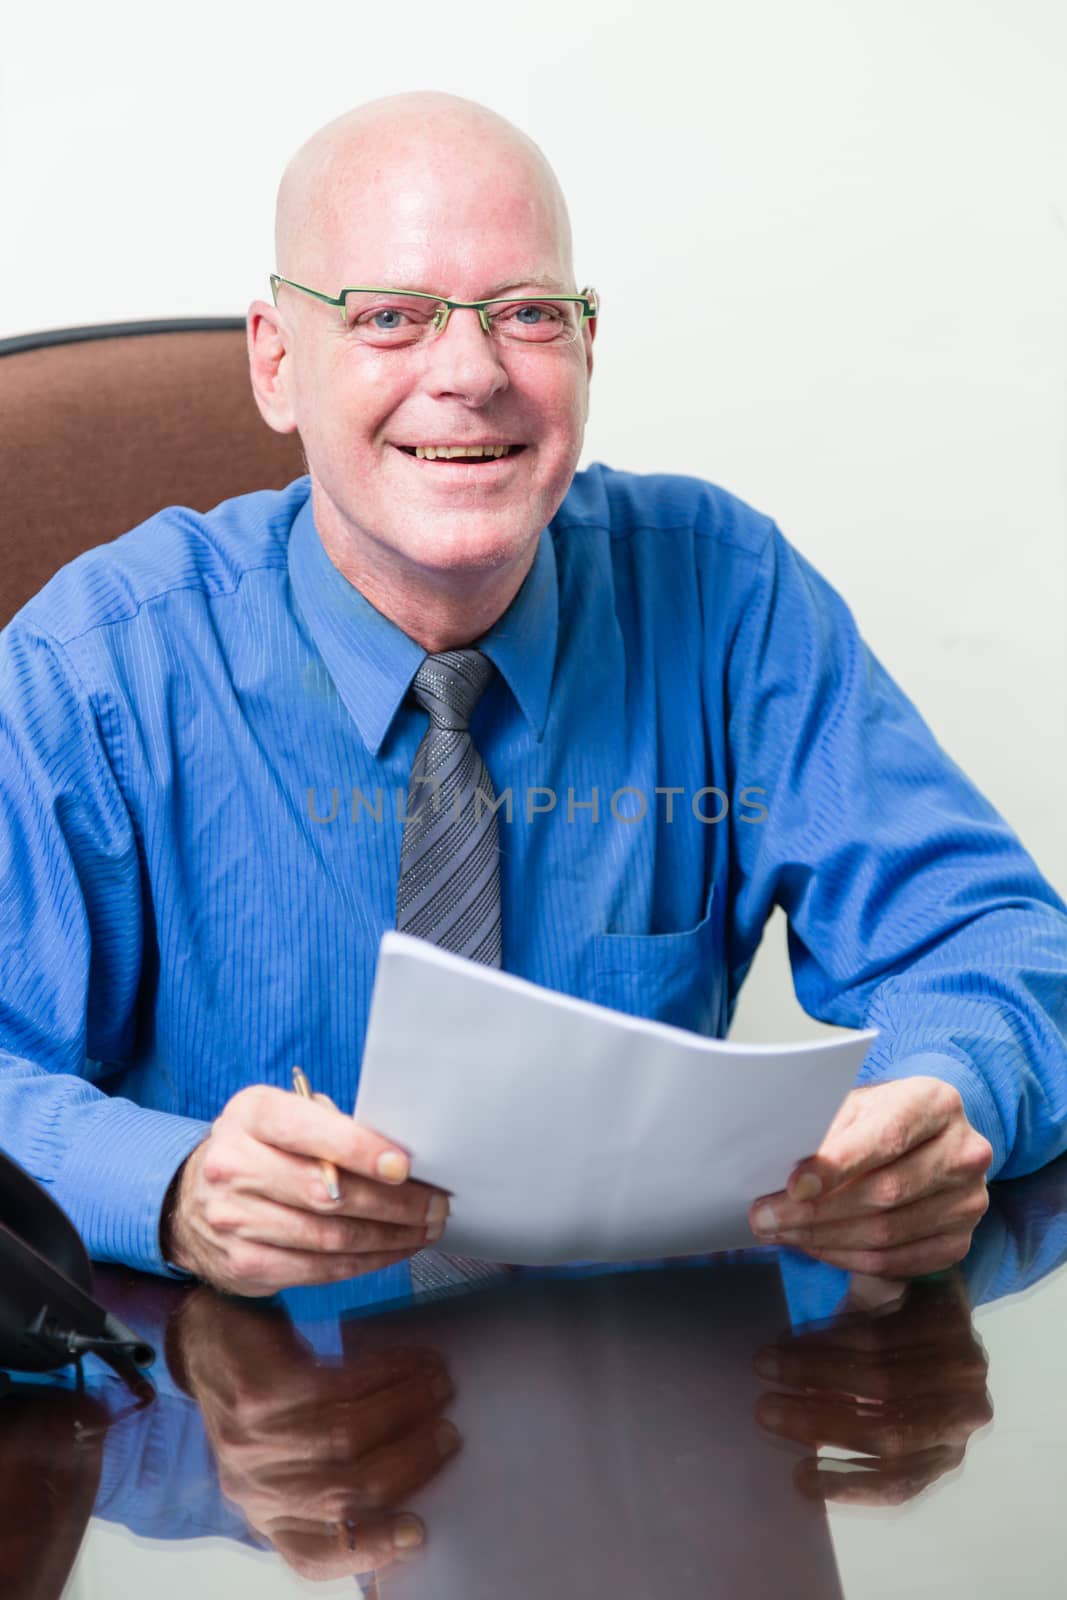 Corporate office worker at desk holding papers looking at camera